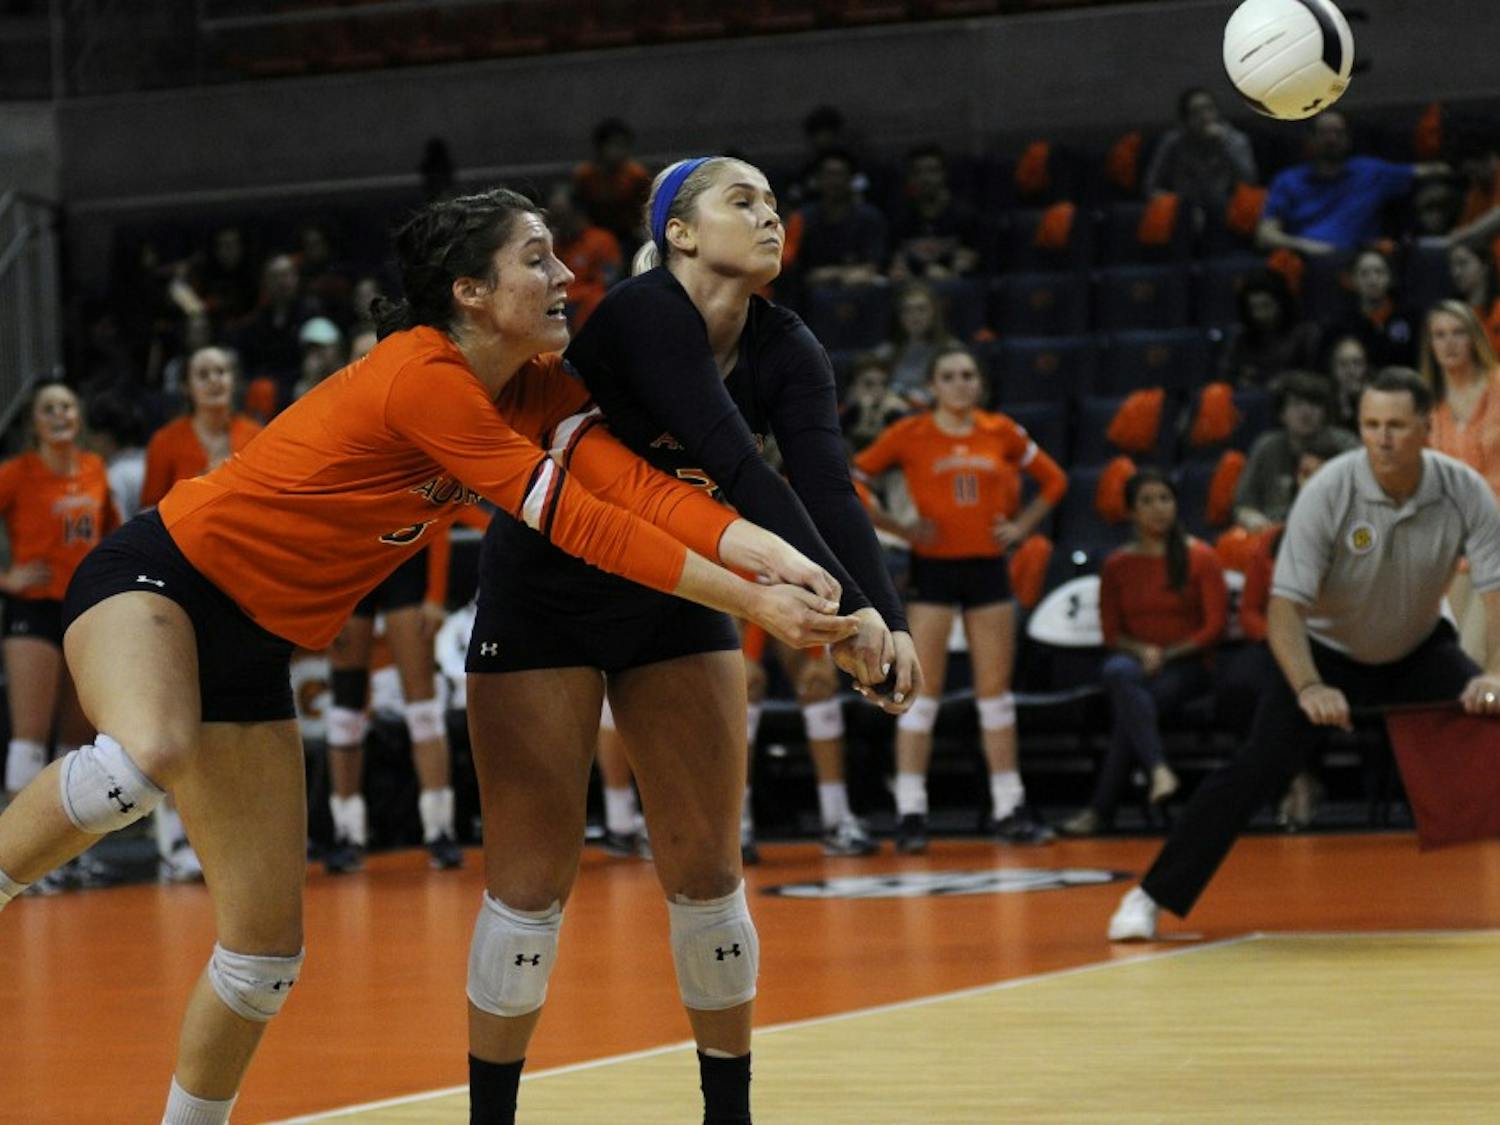 Brenna McIlroy (8) and Jesse Earl (3) go for the ball during Auburn Volleyball vs. Alabama on Wednesday, Nov. 1, 2017 in Auburn, Ala.